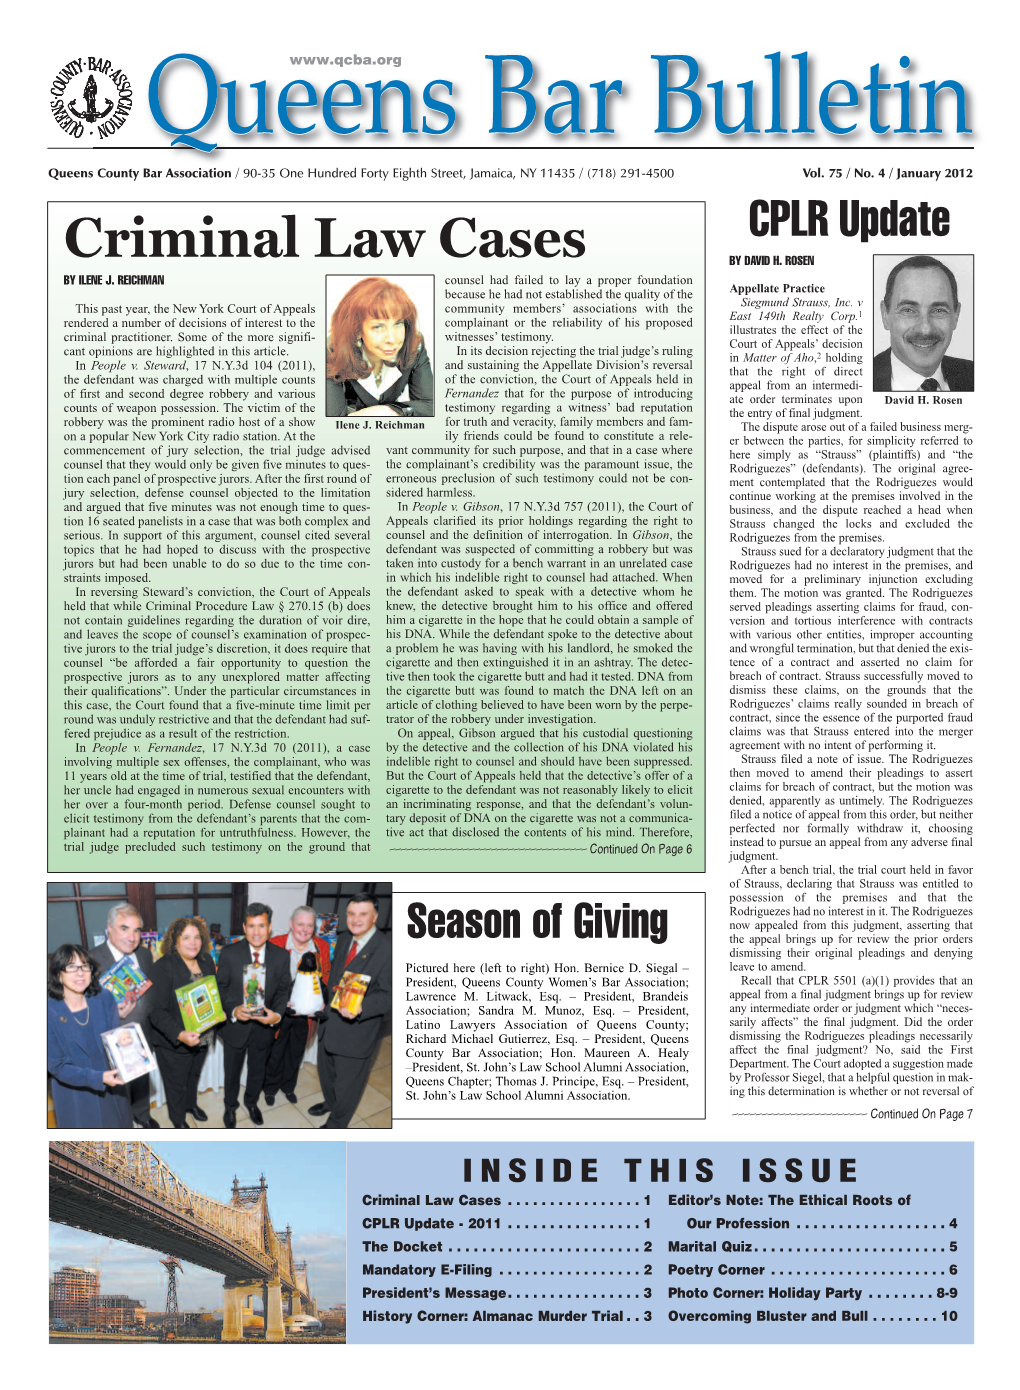 Criminal Law Cases CPLR Update by DAVID H